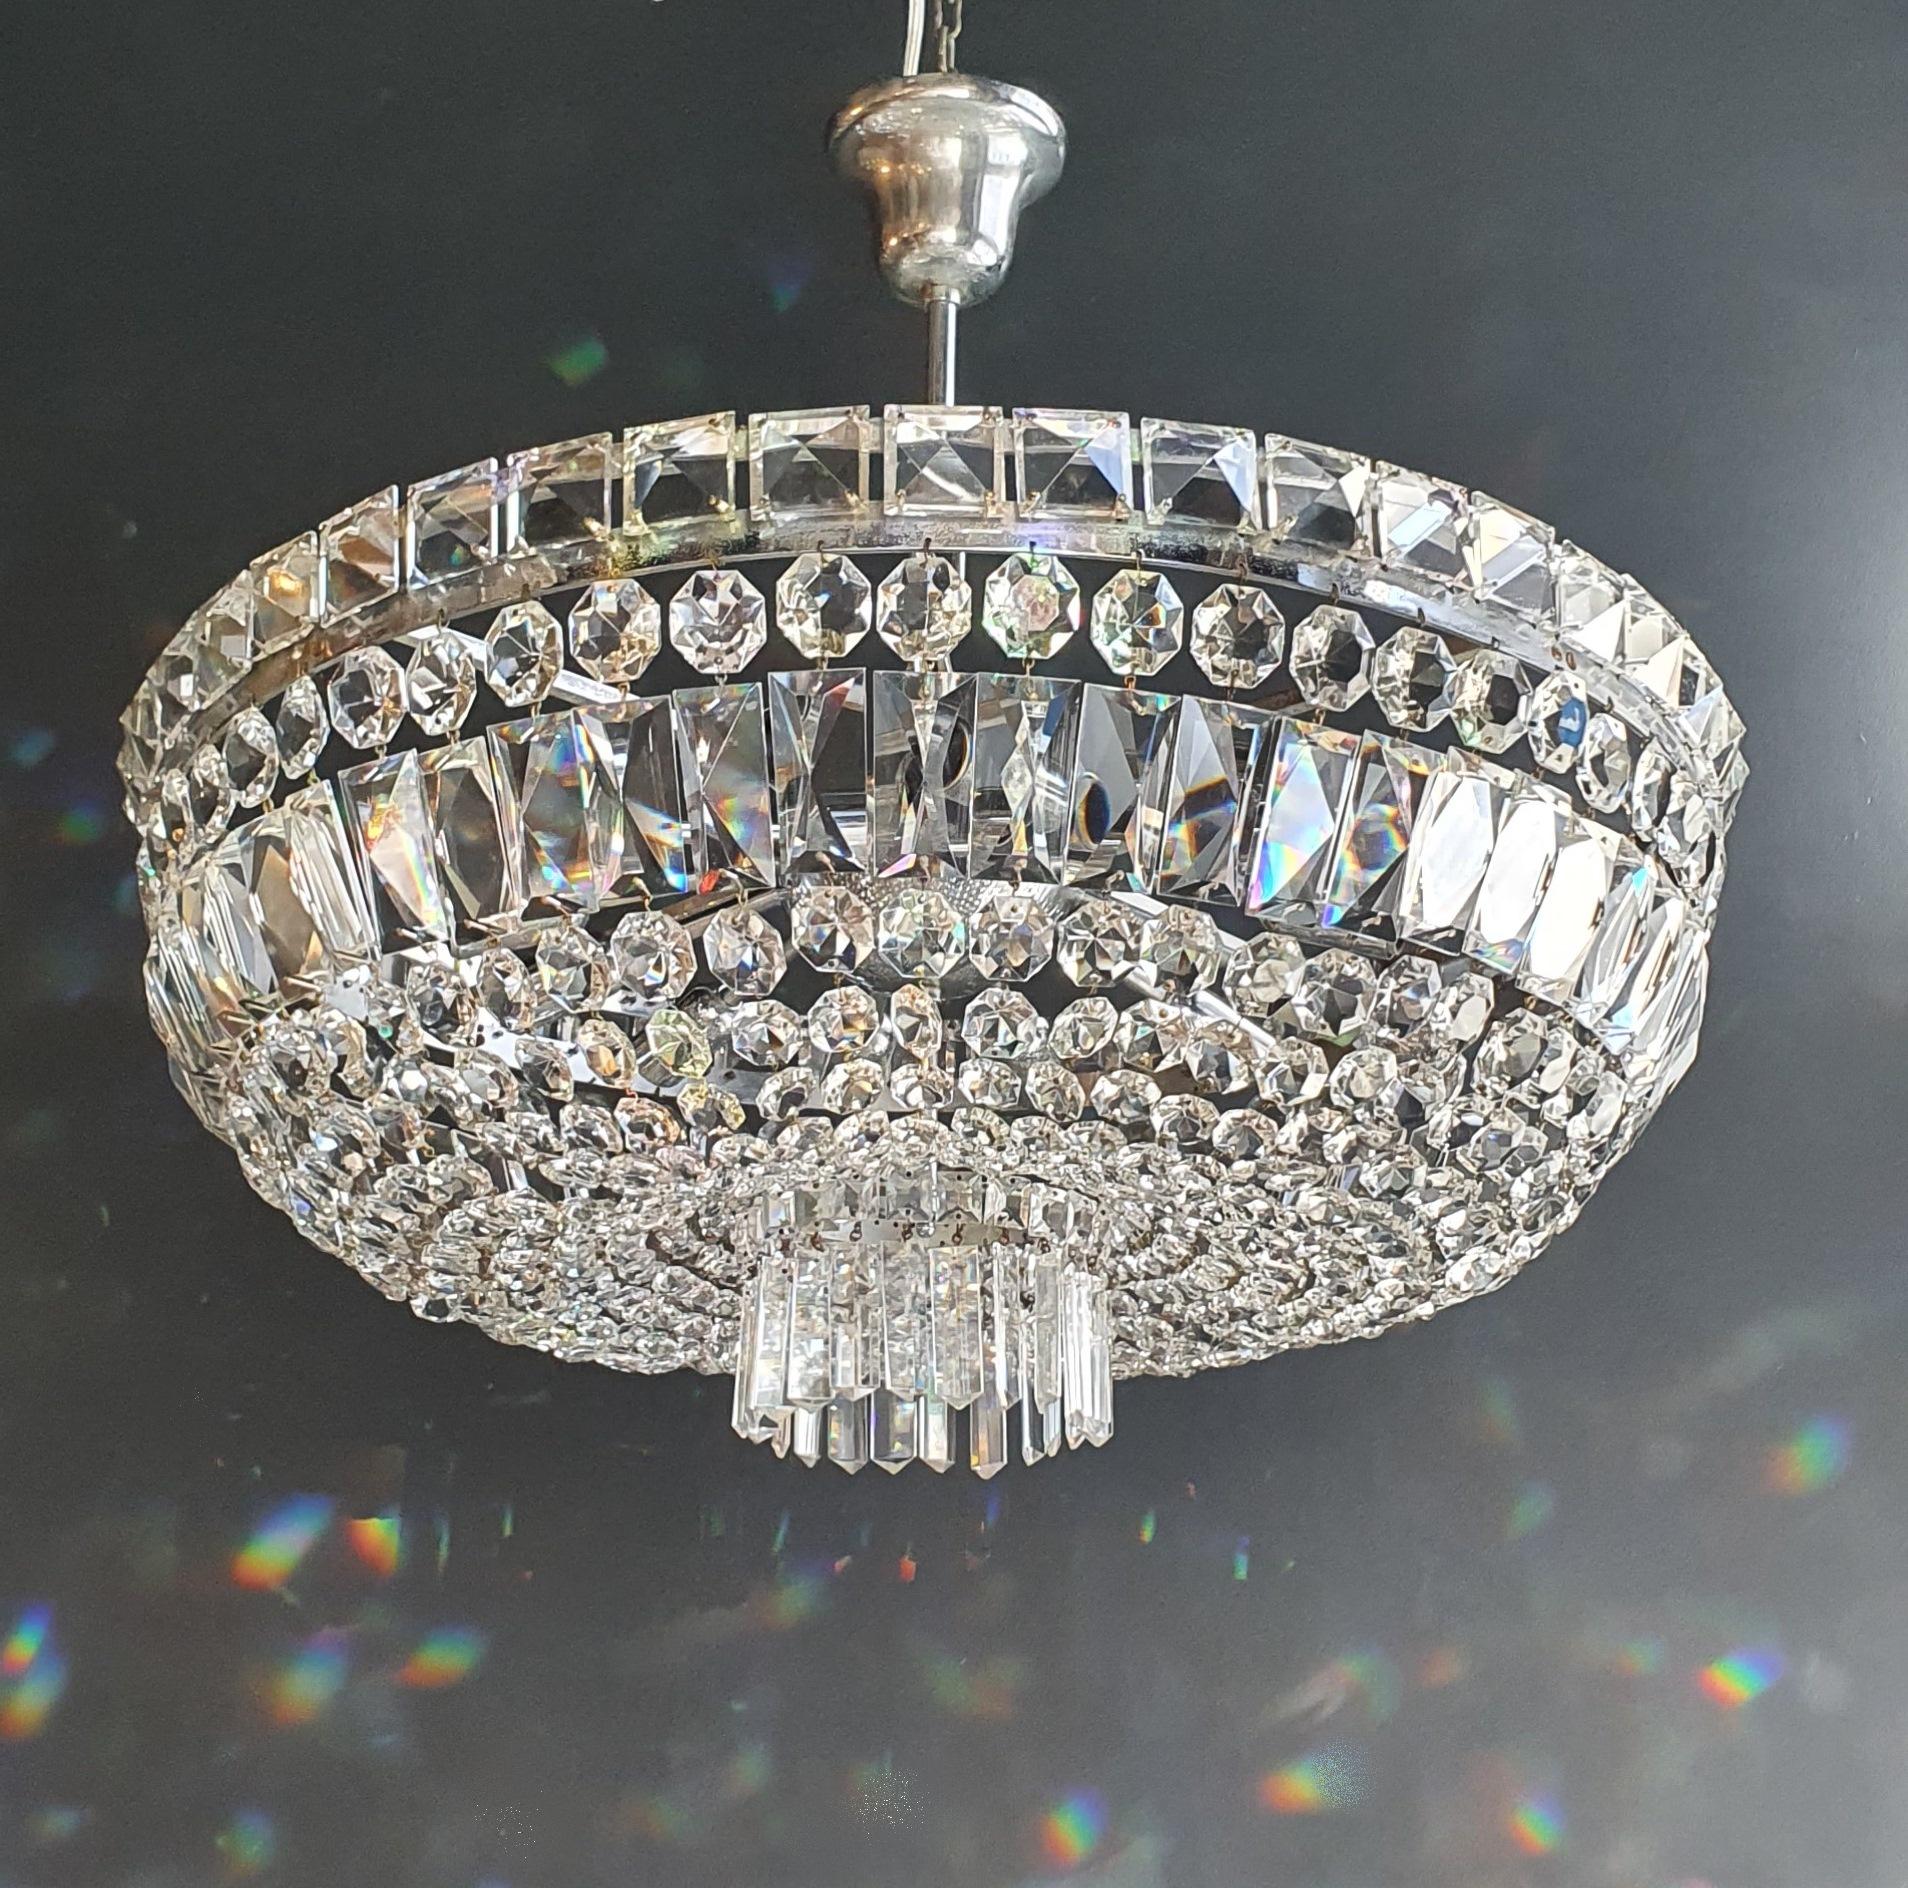 Old chandelier with love and professionally restored in Berlin. electrical wiring works in the US. Re-wired and ready to hang. not one missing. Cabling completely renewed. Crystal, hand-knotted.

Measures: Total height 65 cm, height without chain